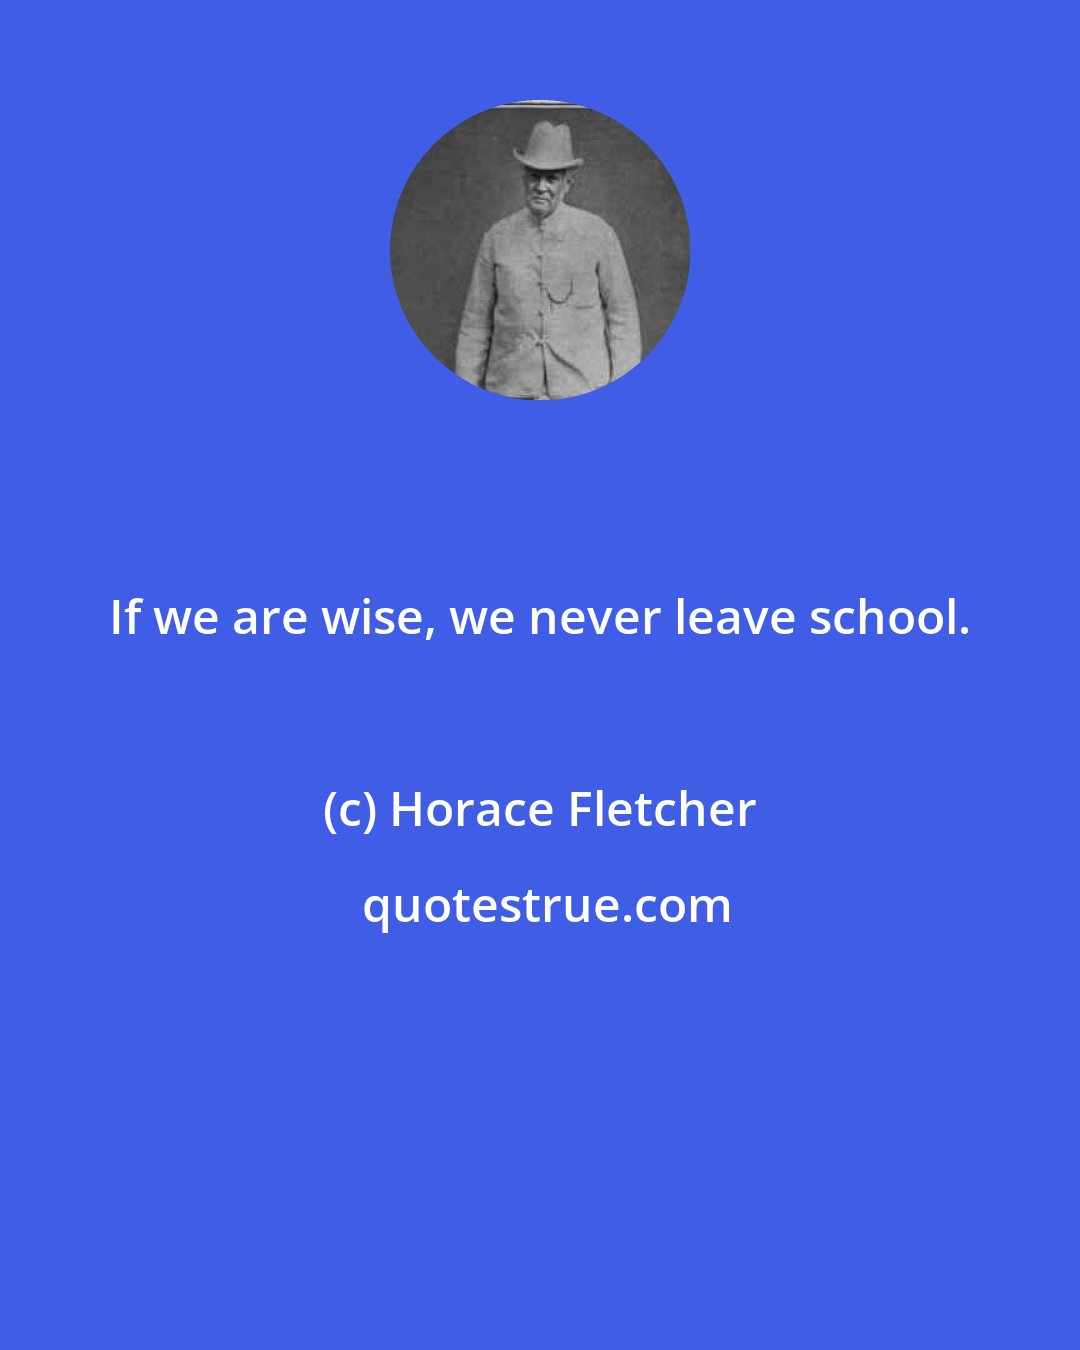 Horace Fletcher: If we are wise, we never leave school.